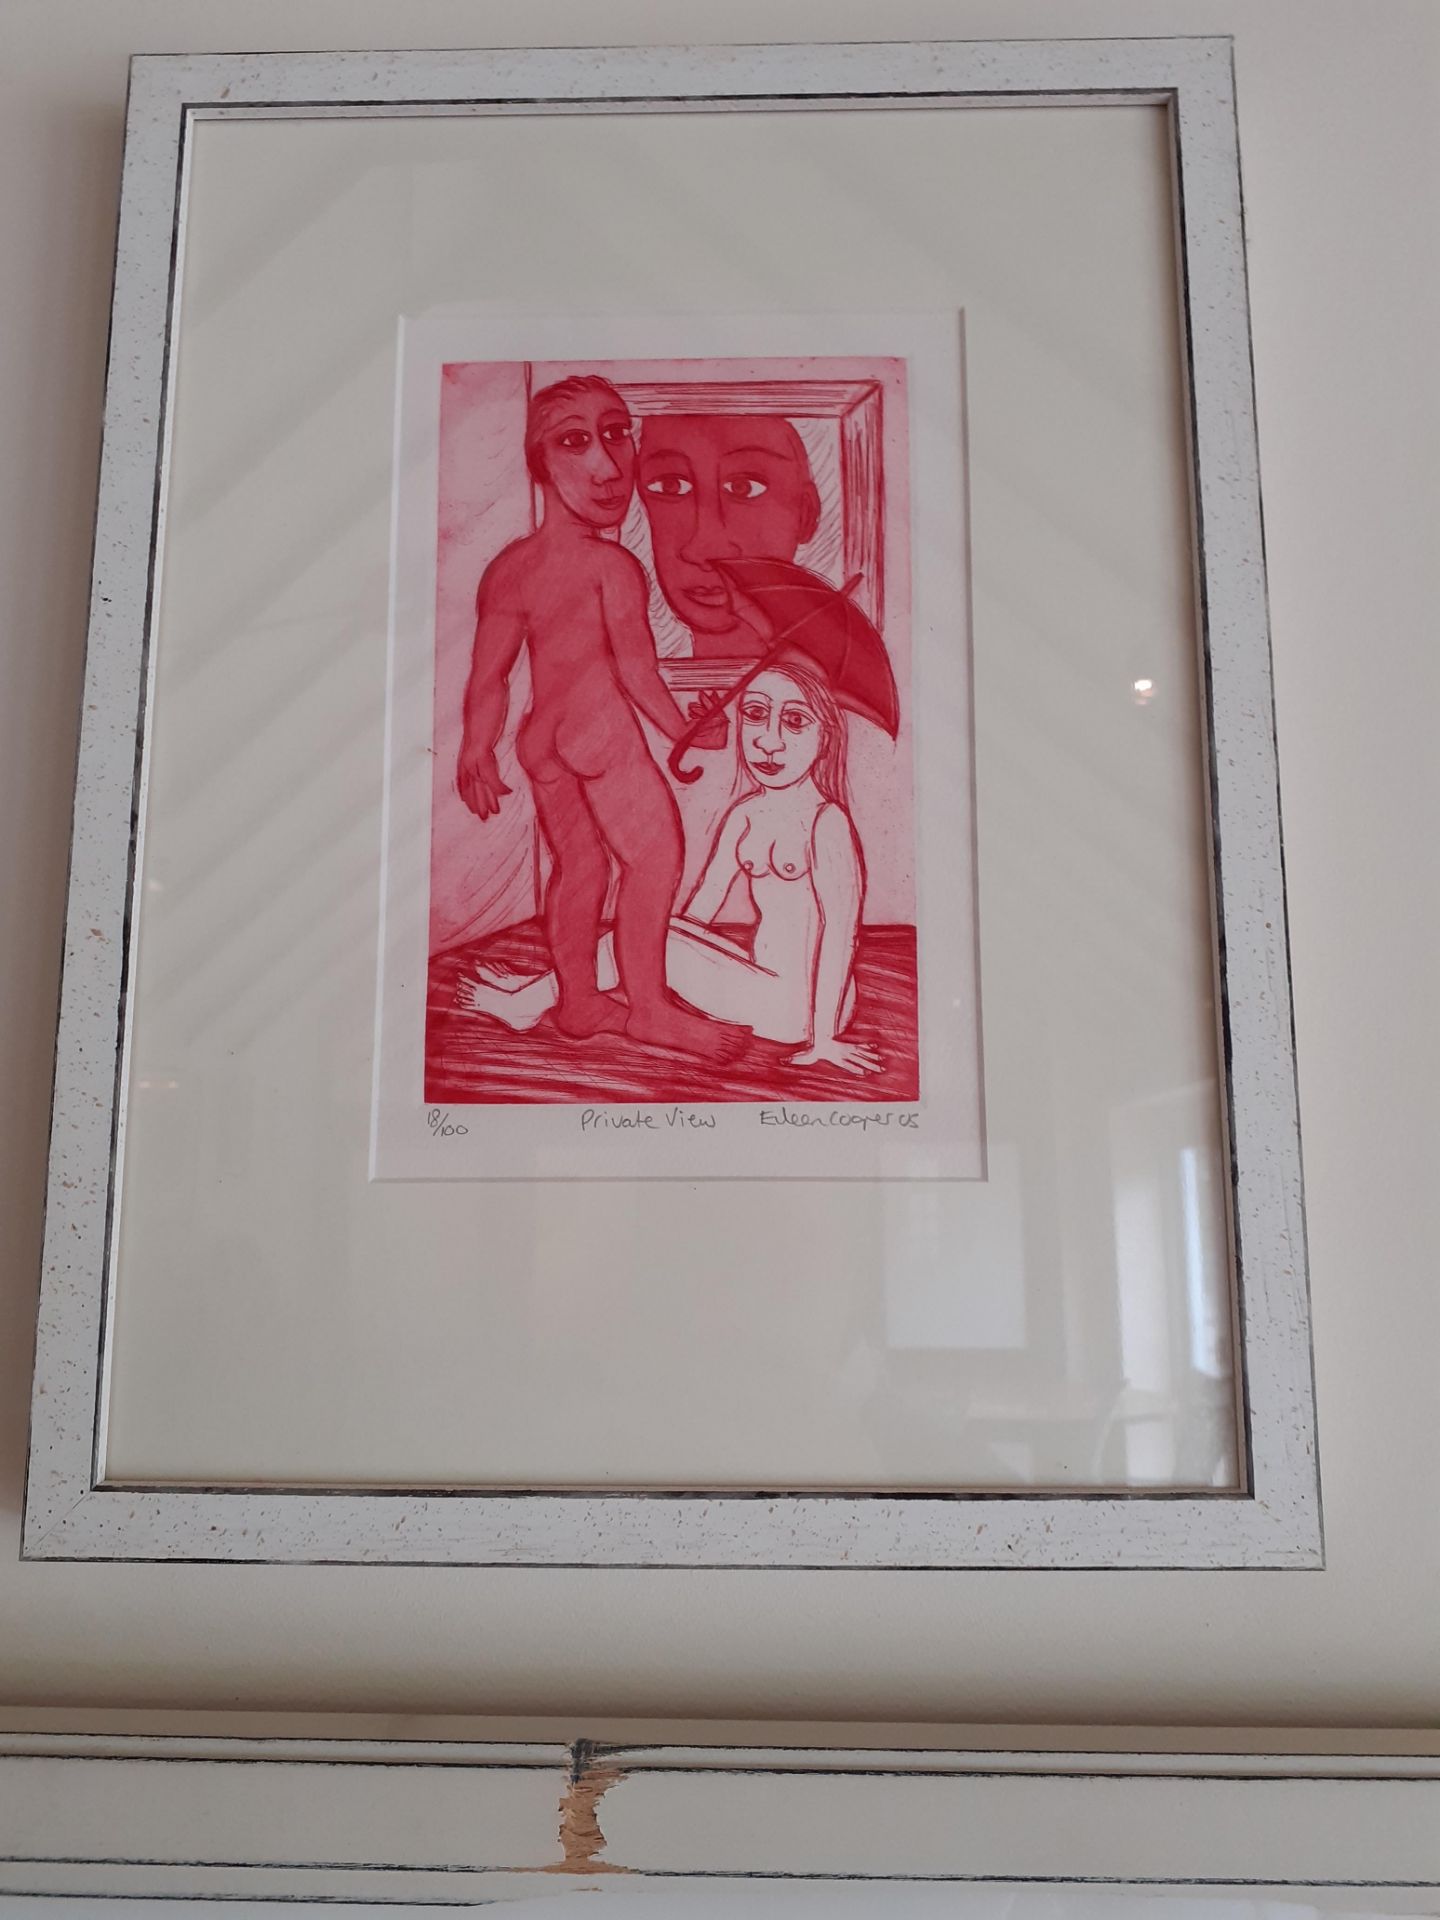 Mary Feddon limited edition print 'The Tabac Jar' - Image 2 of 2